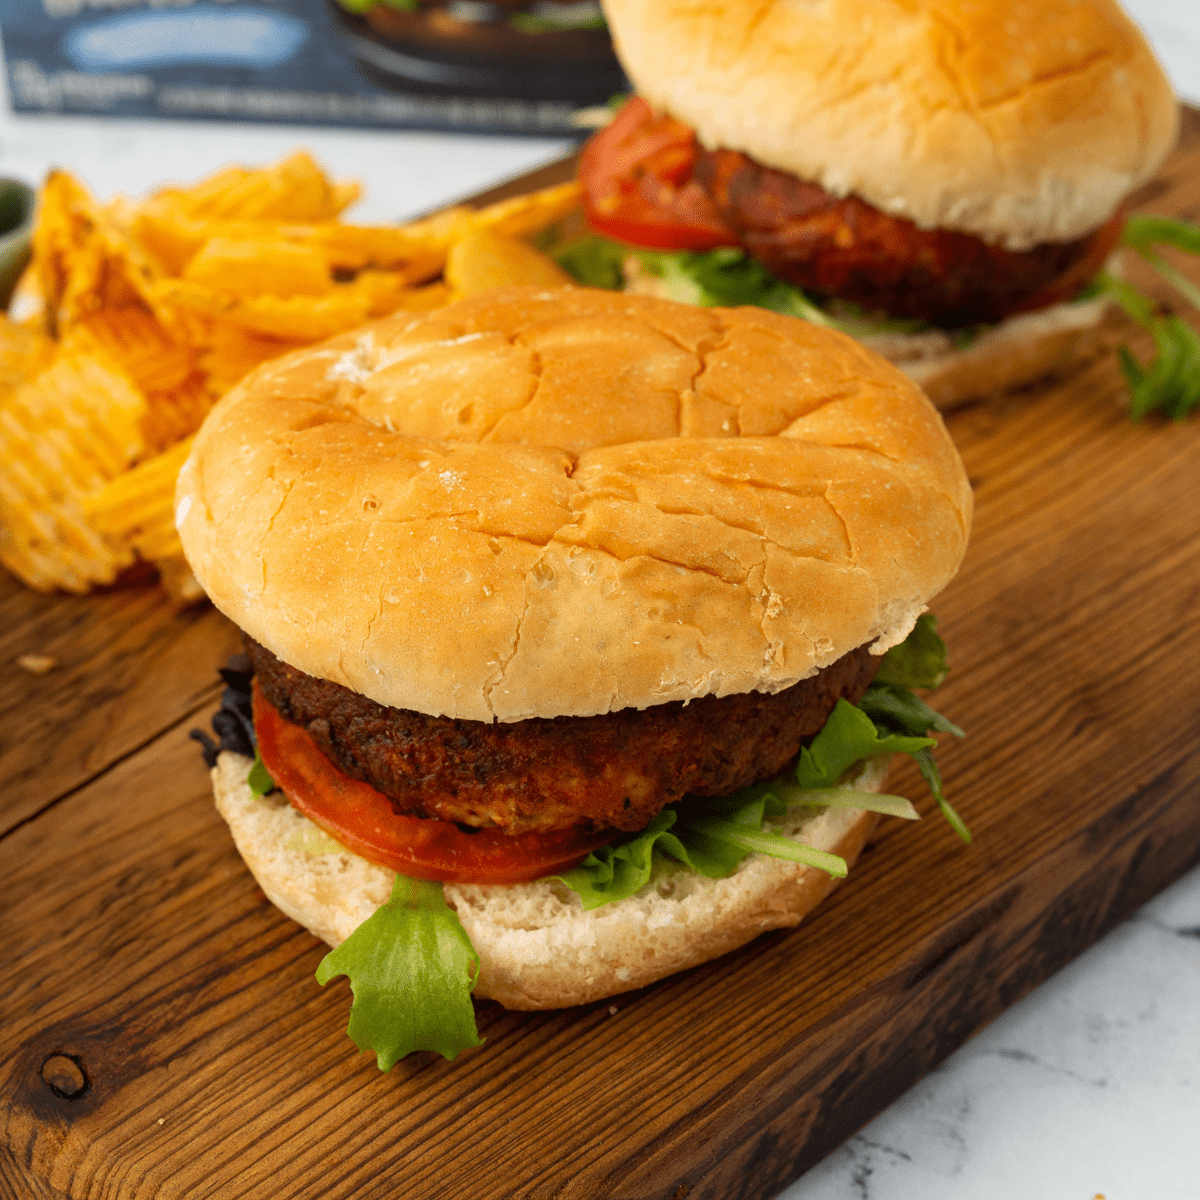 GRILLED SALMON BURGERS, From the WHOLE FOODS Frozen Section